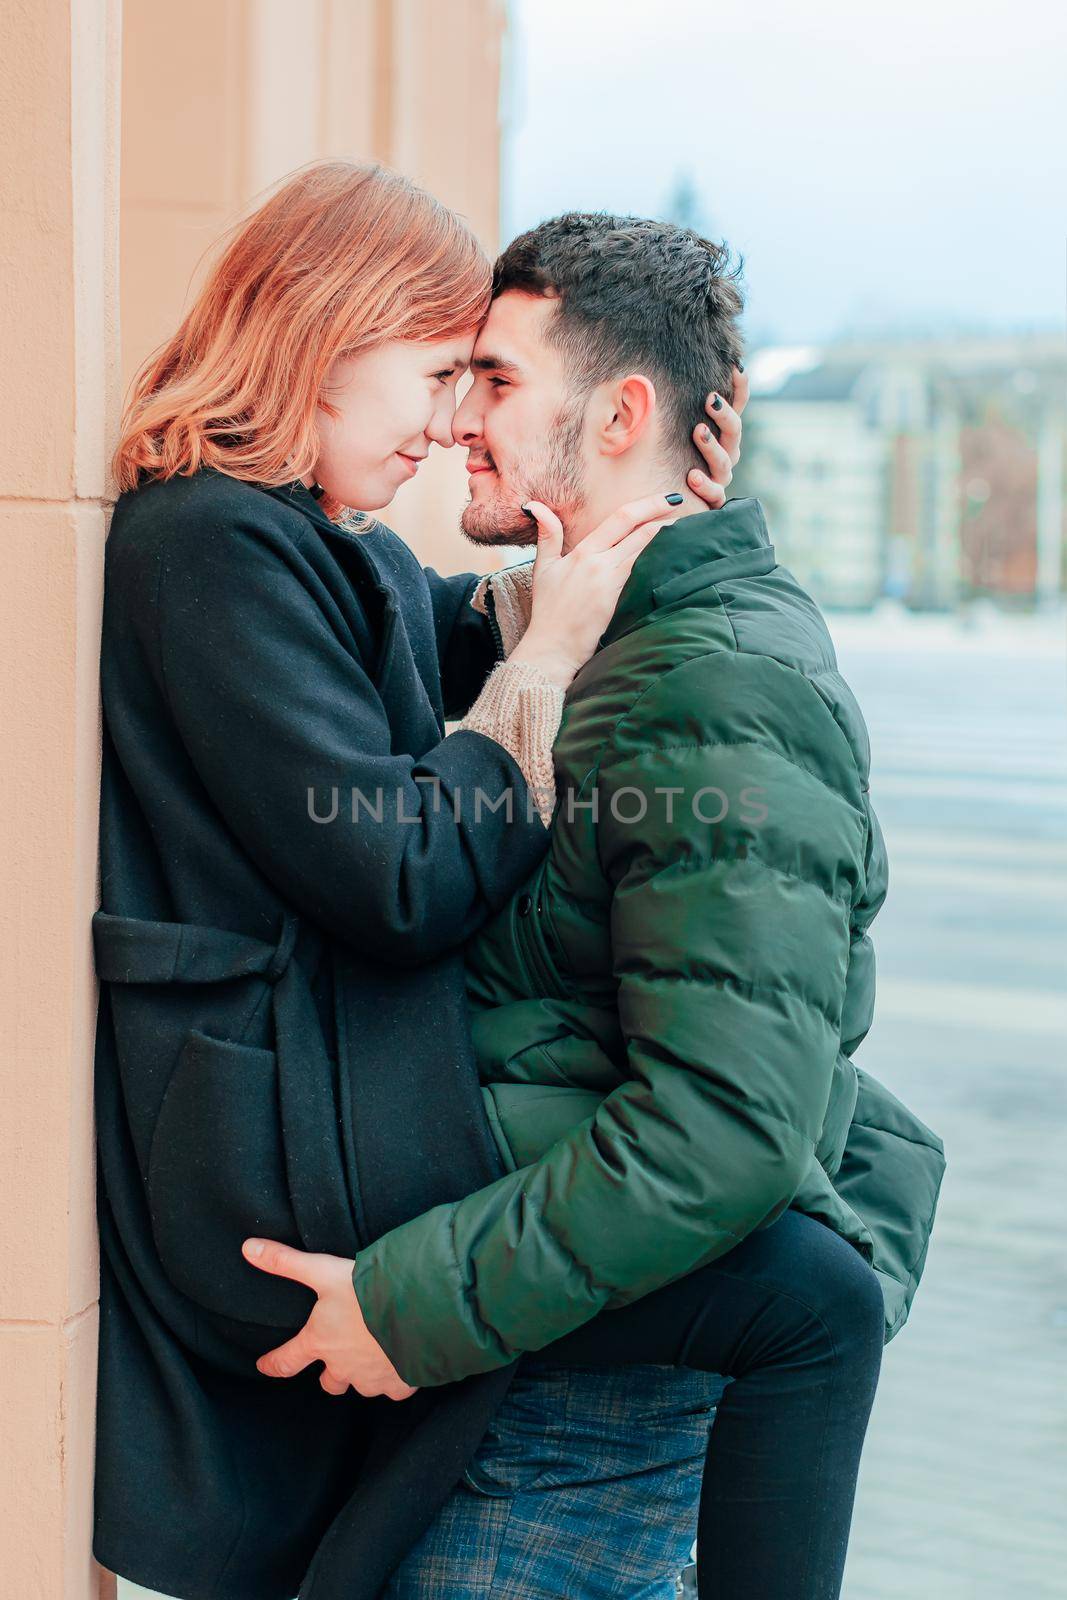 Happy Loving Couple Smiling and Hugging on the Street. Two Happy People Love Story - Medium Shot Portrait